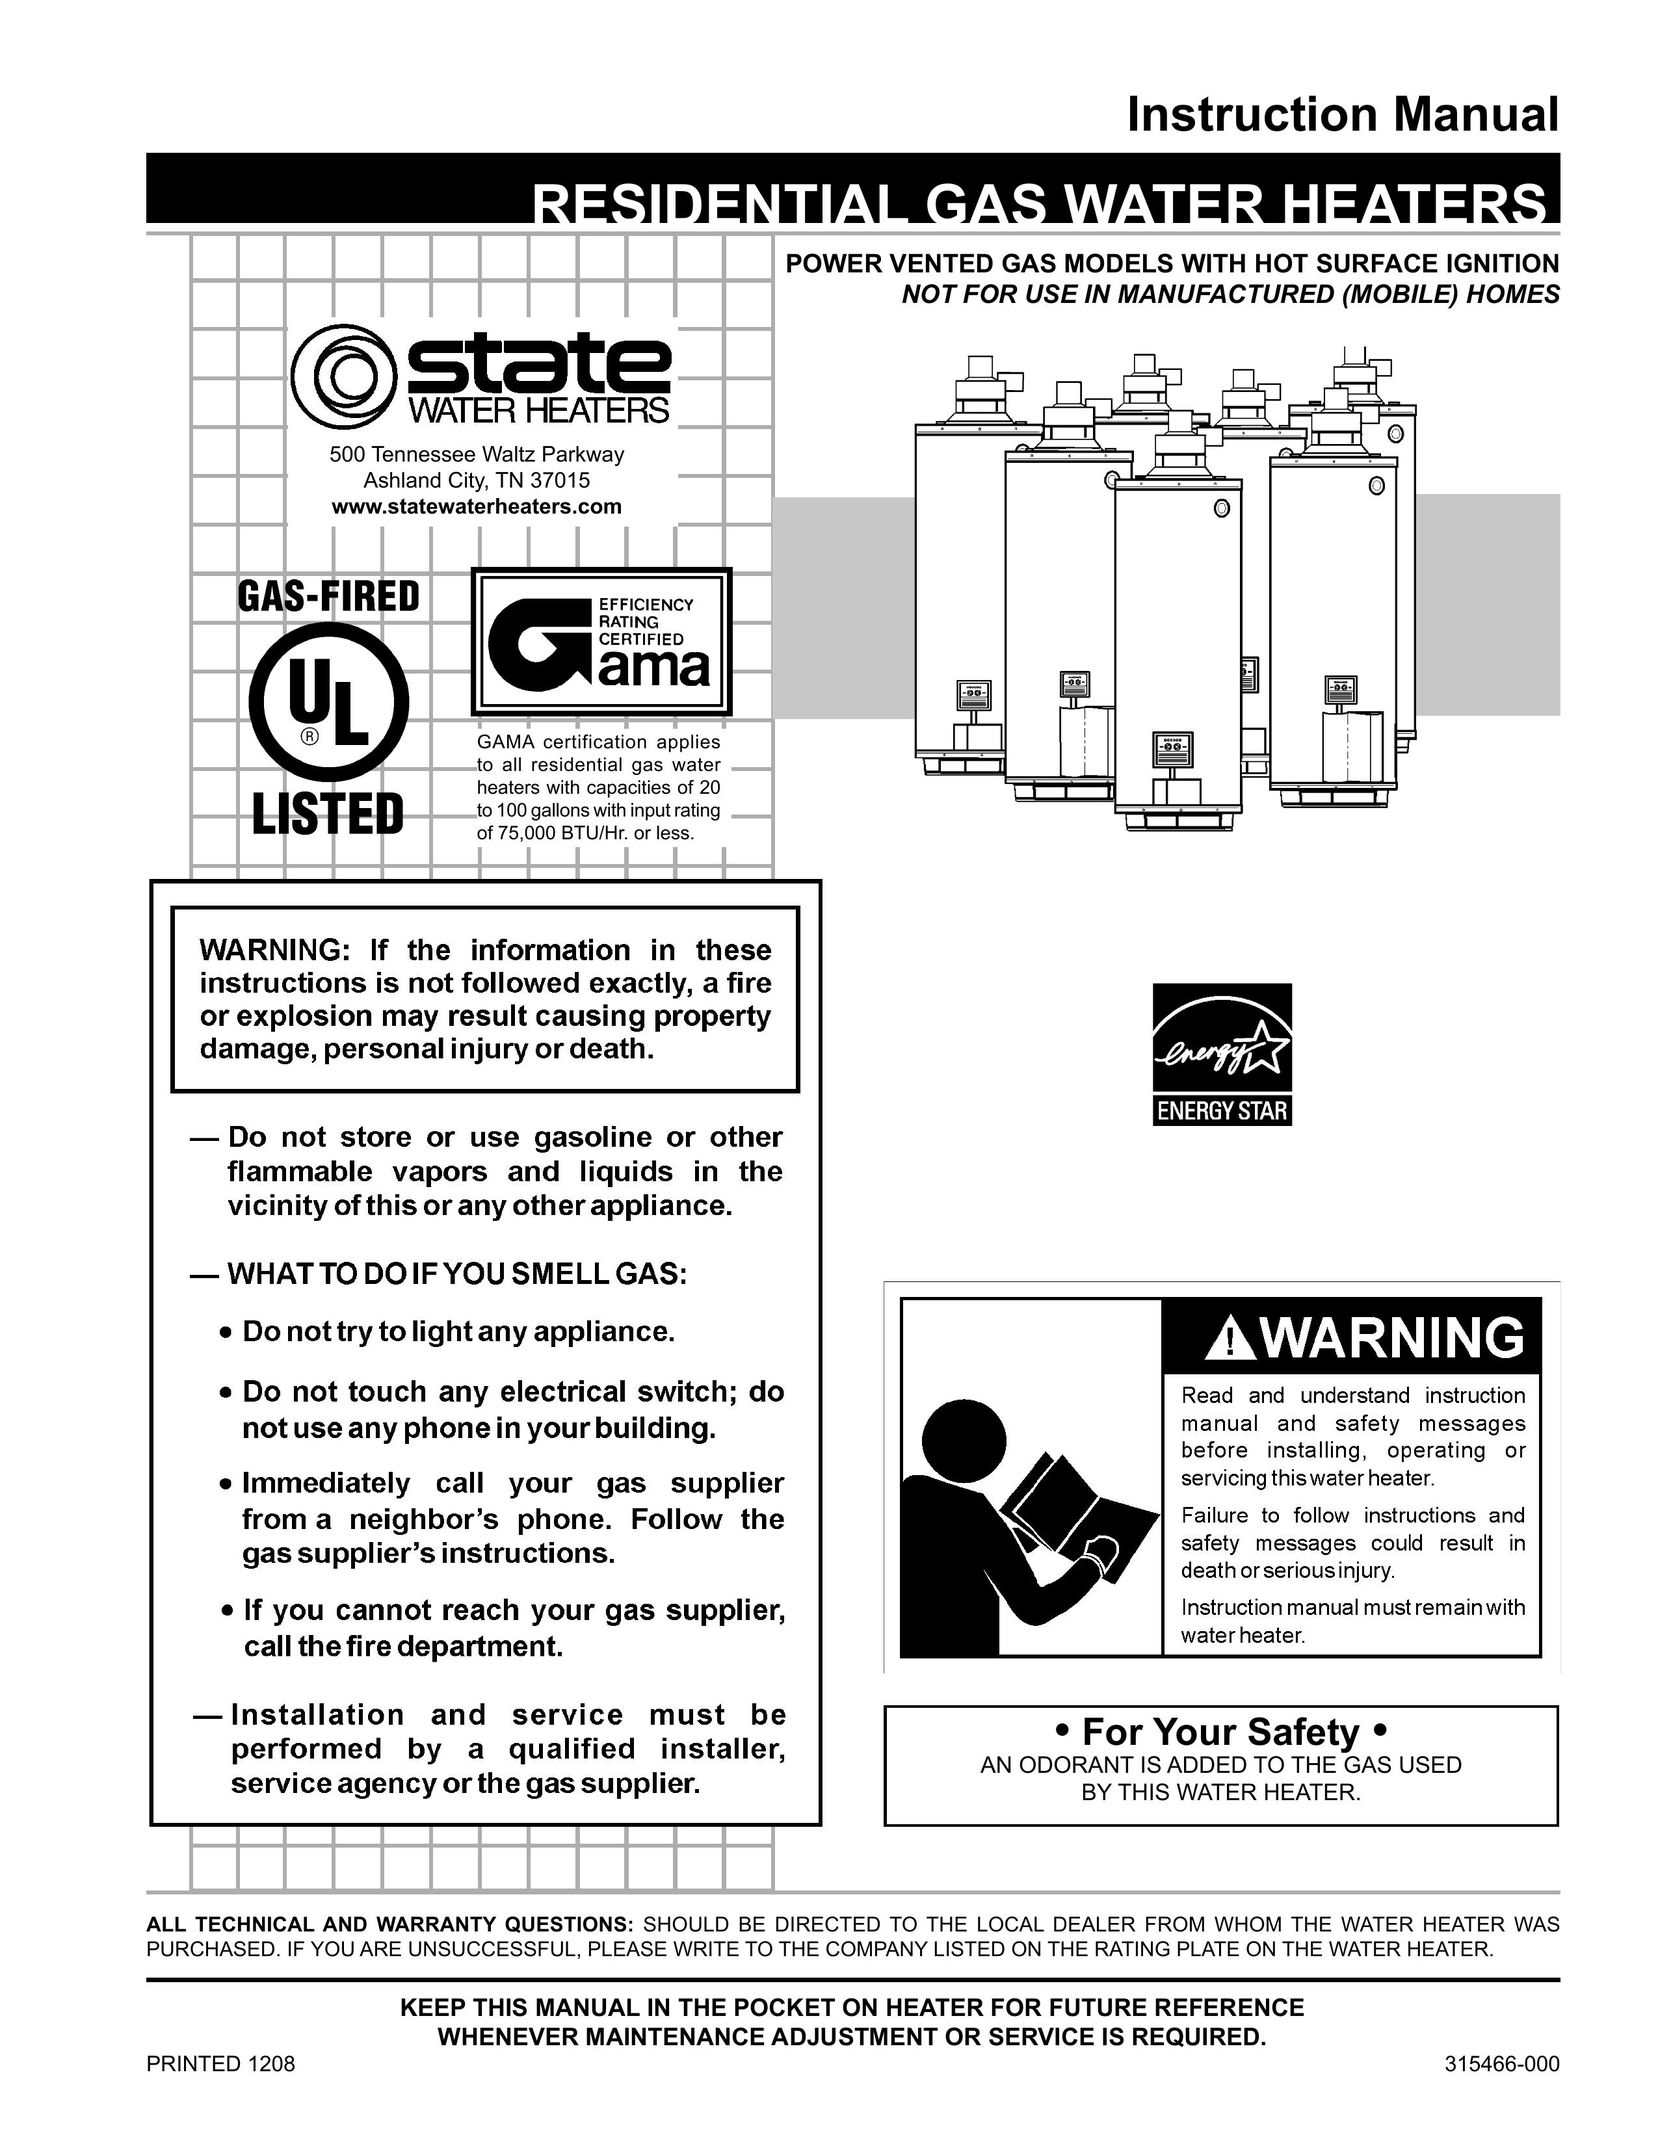 State Industries 315466-000 Water Heater User Manual